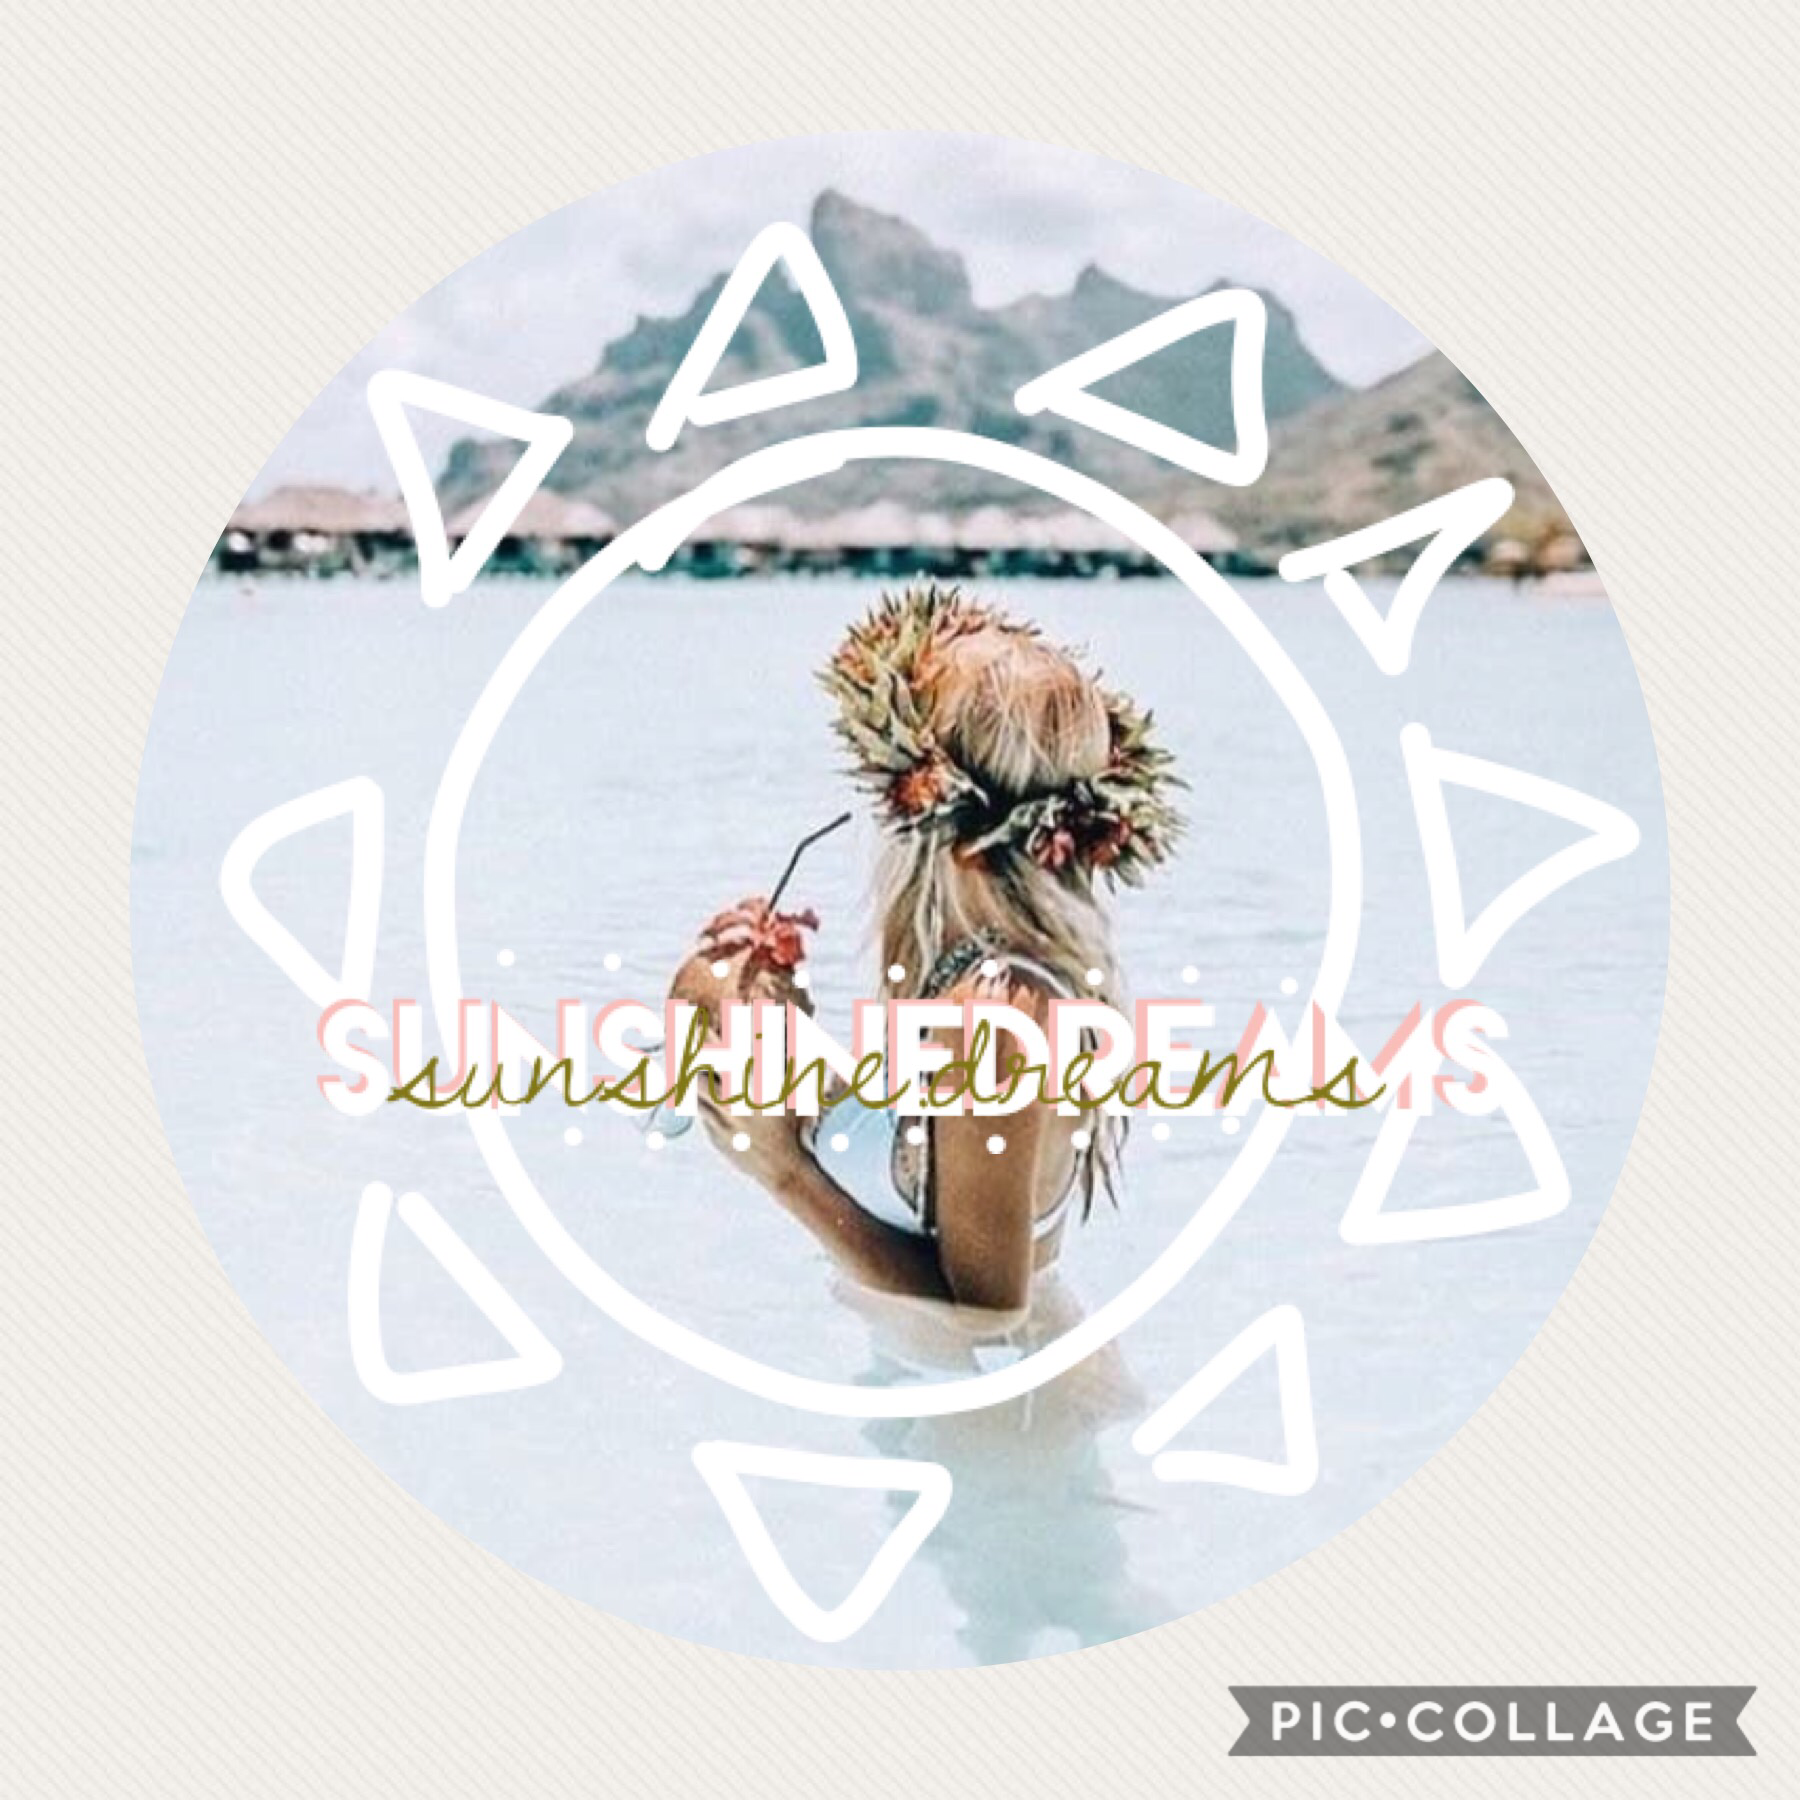 NEWS: I’m starting to make icons!! I’ll be posting an icon sign up sheet for anyone who wants one. This is mine, what do you think? Also: fun fact: I used to make a ton of icons on an app called Polyvore 😂 